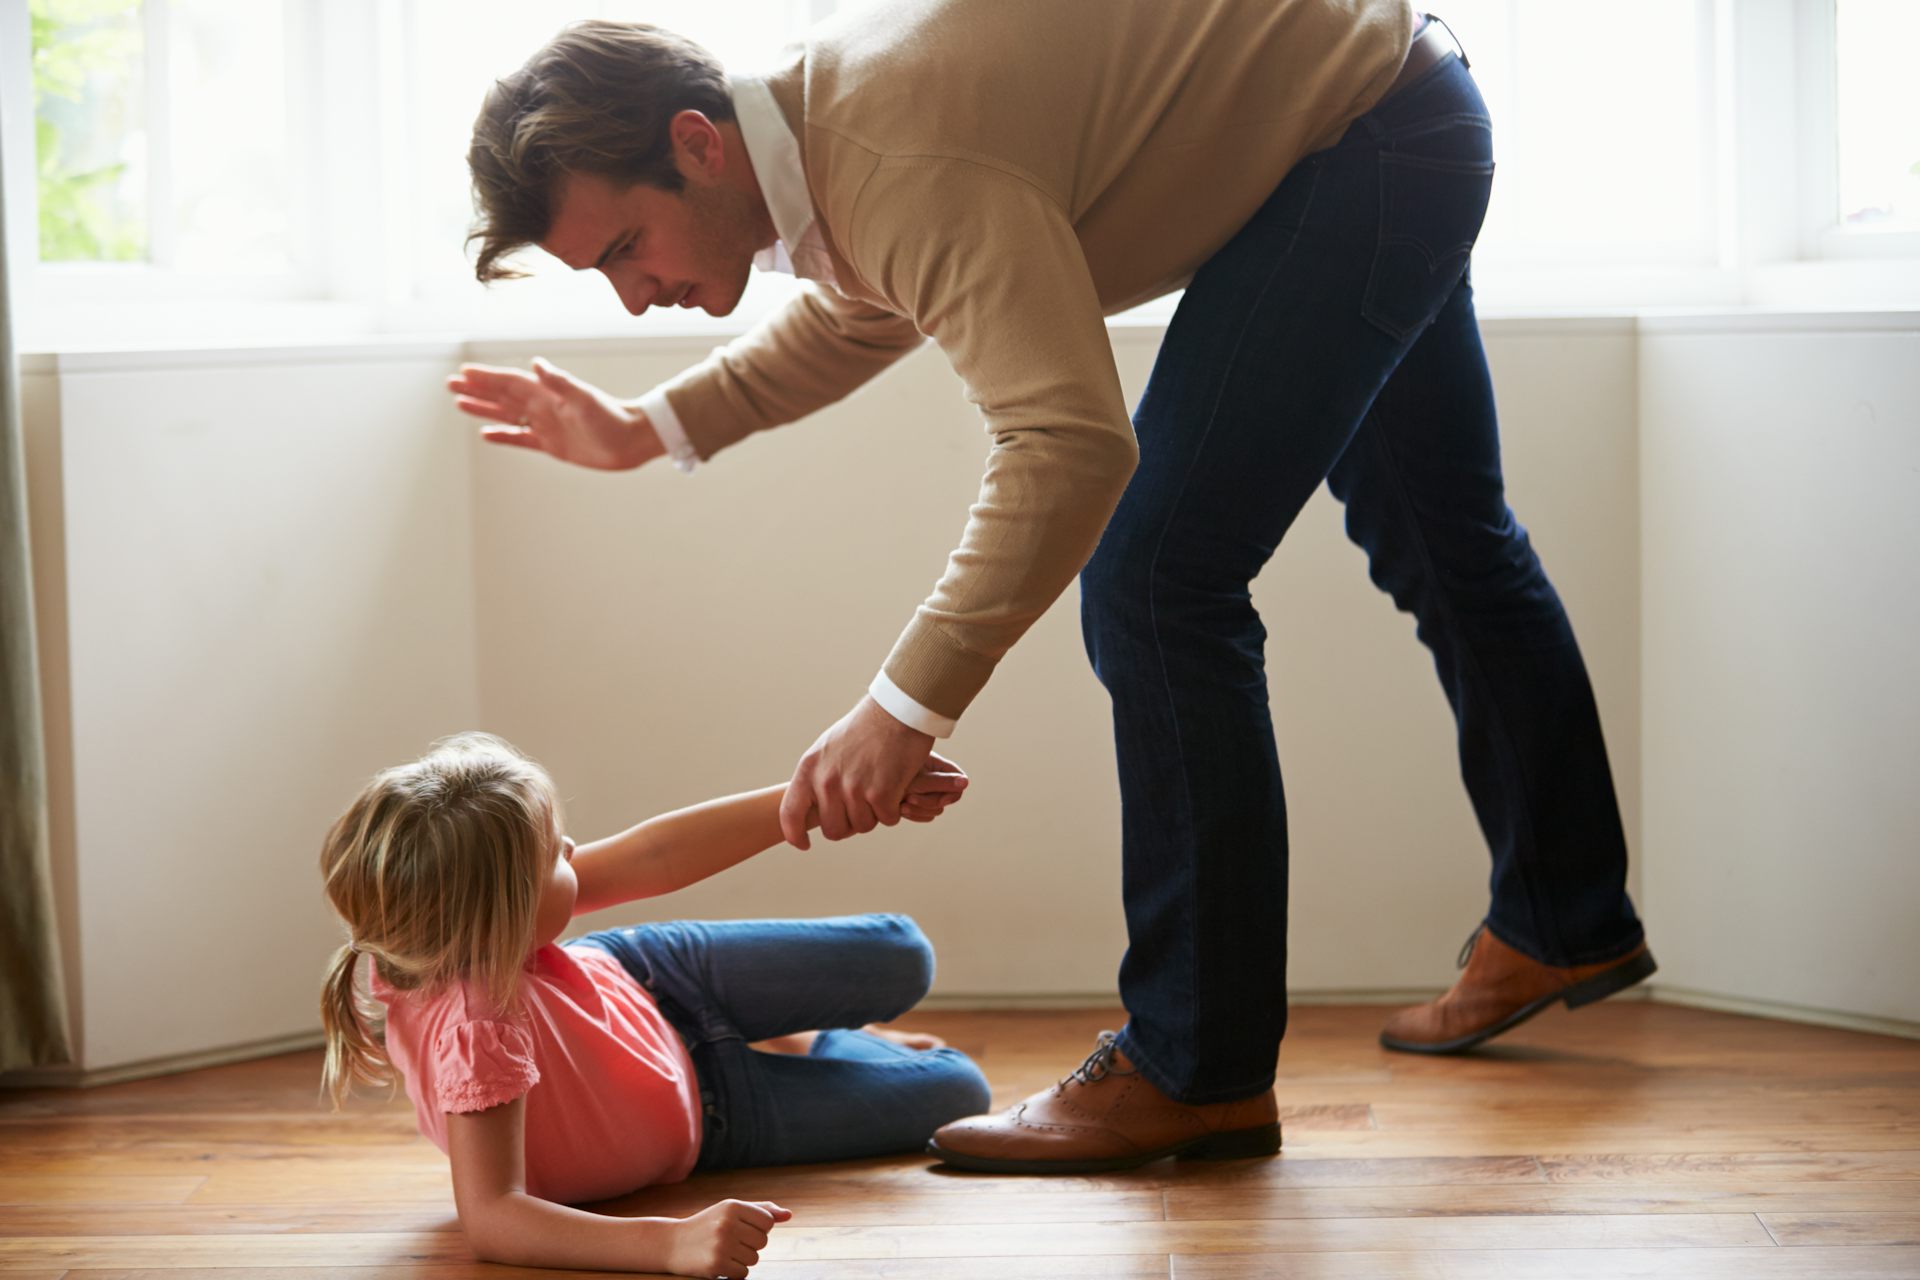 Hard evidence spanking could lead to pic